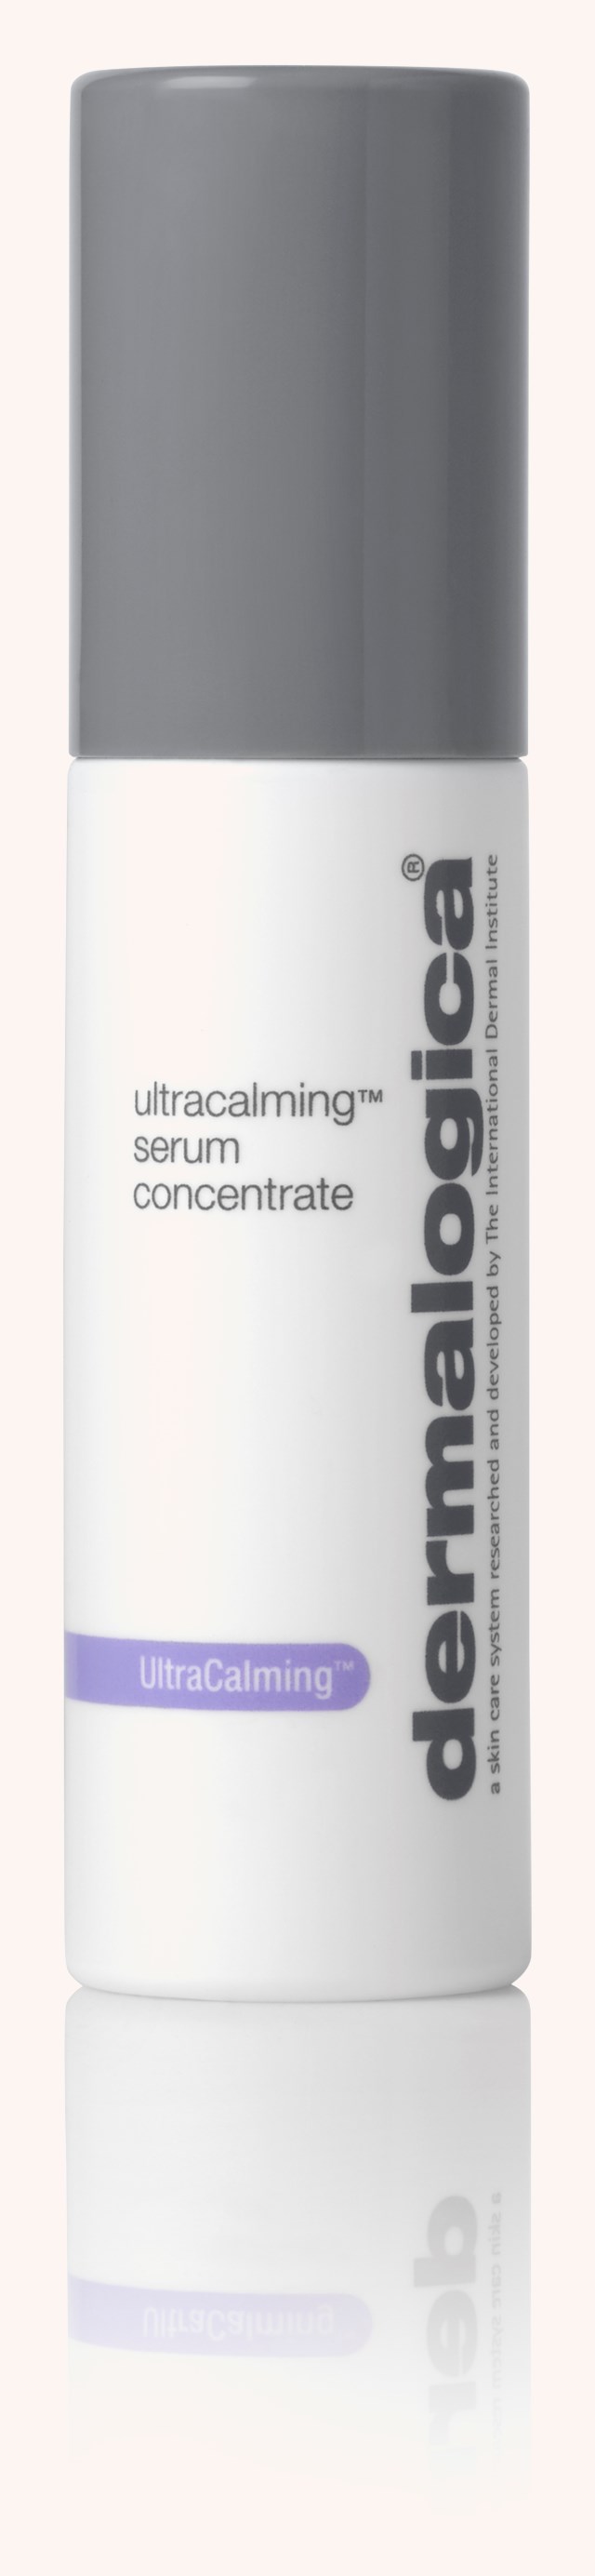 UltraCalming Serum Concentrate 40 ml